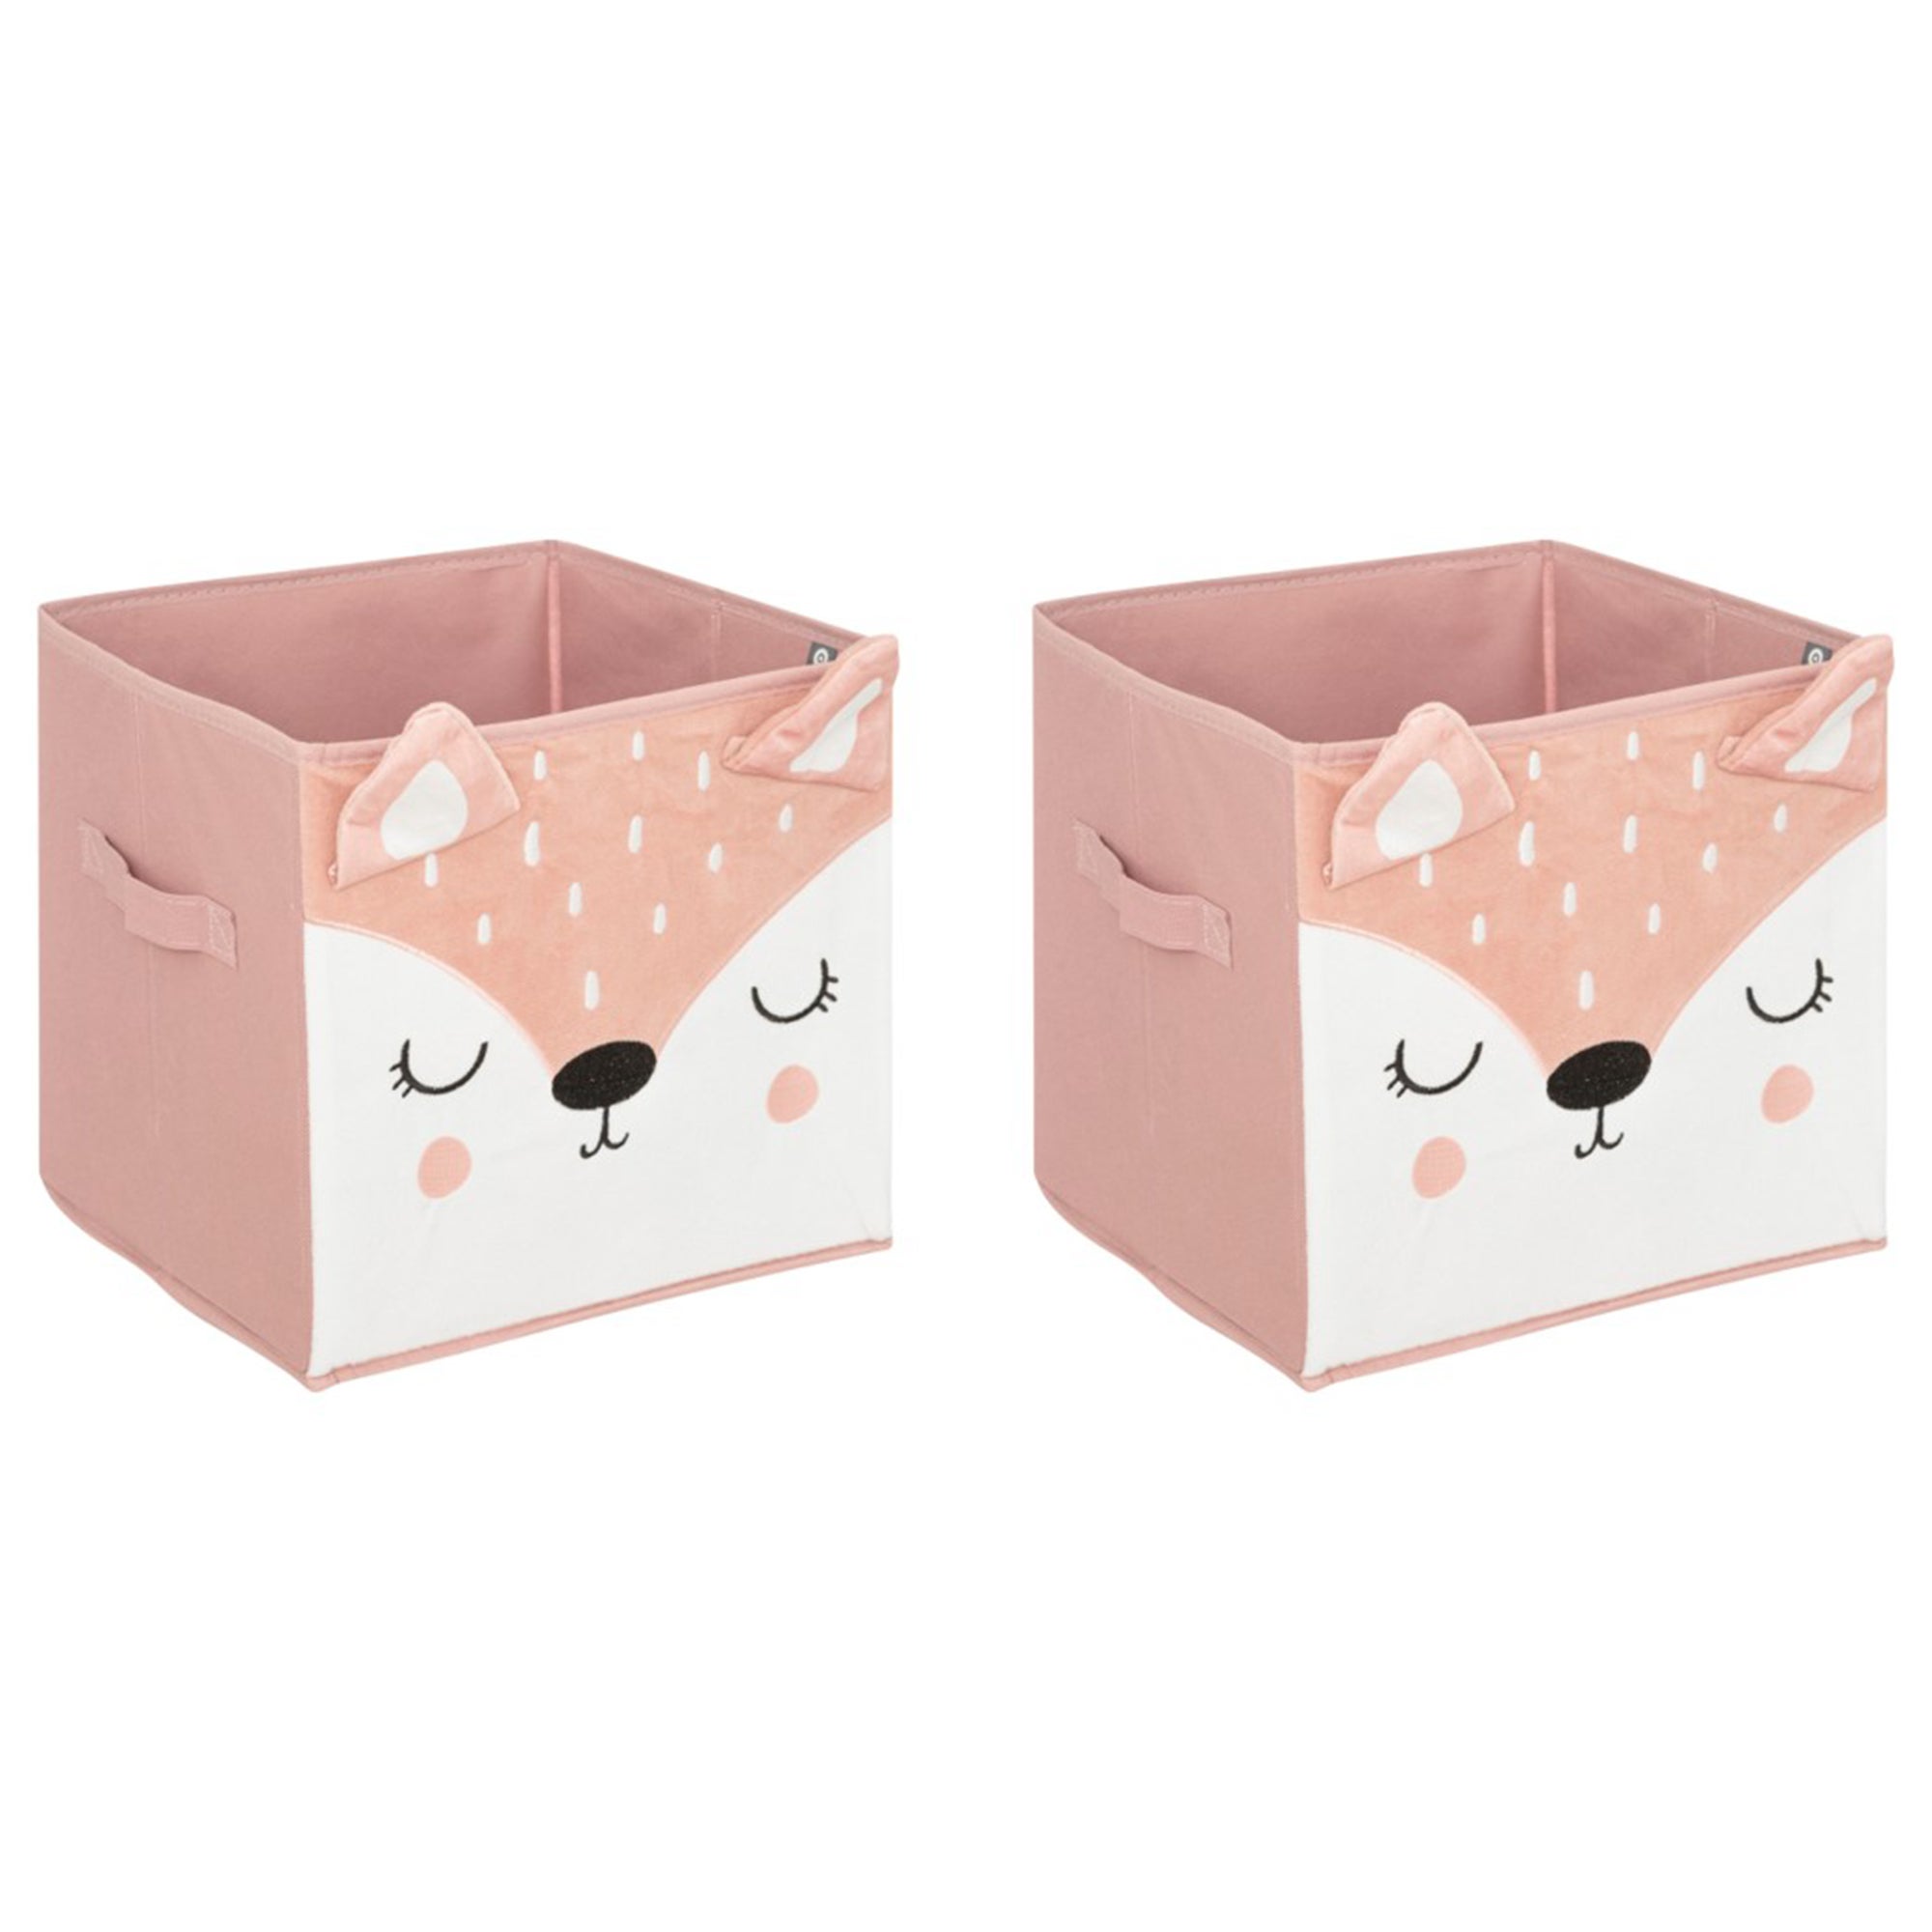 Kids Mix And Modul Set Of 2 Pink Fox Cube Storage Boxes Pink